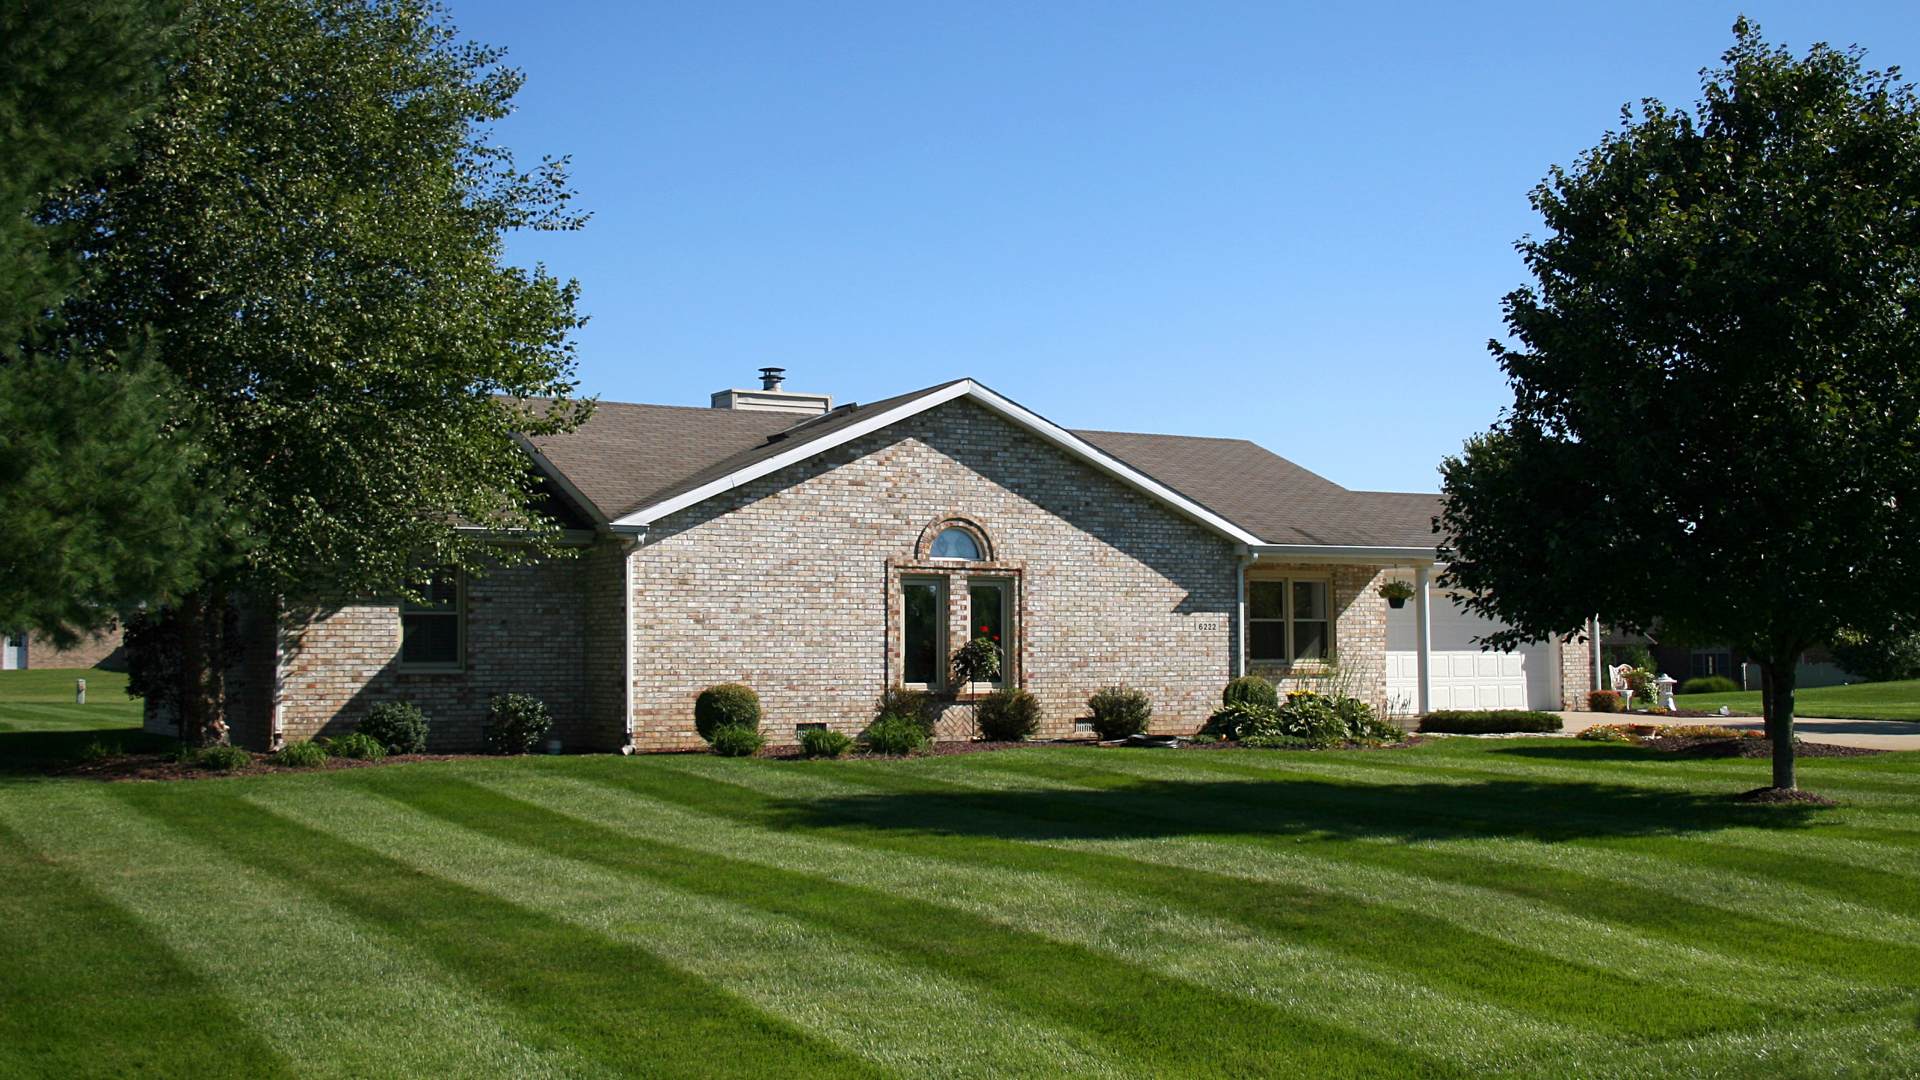 Landscaping home front in Pittsfield, WI.